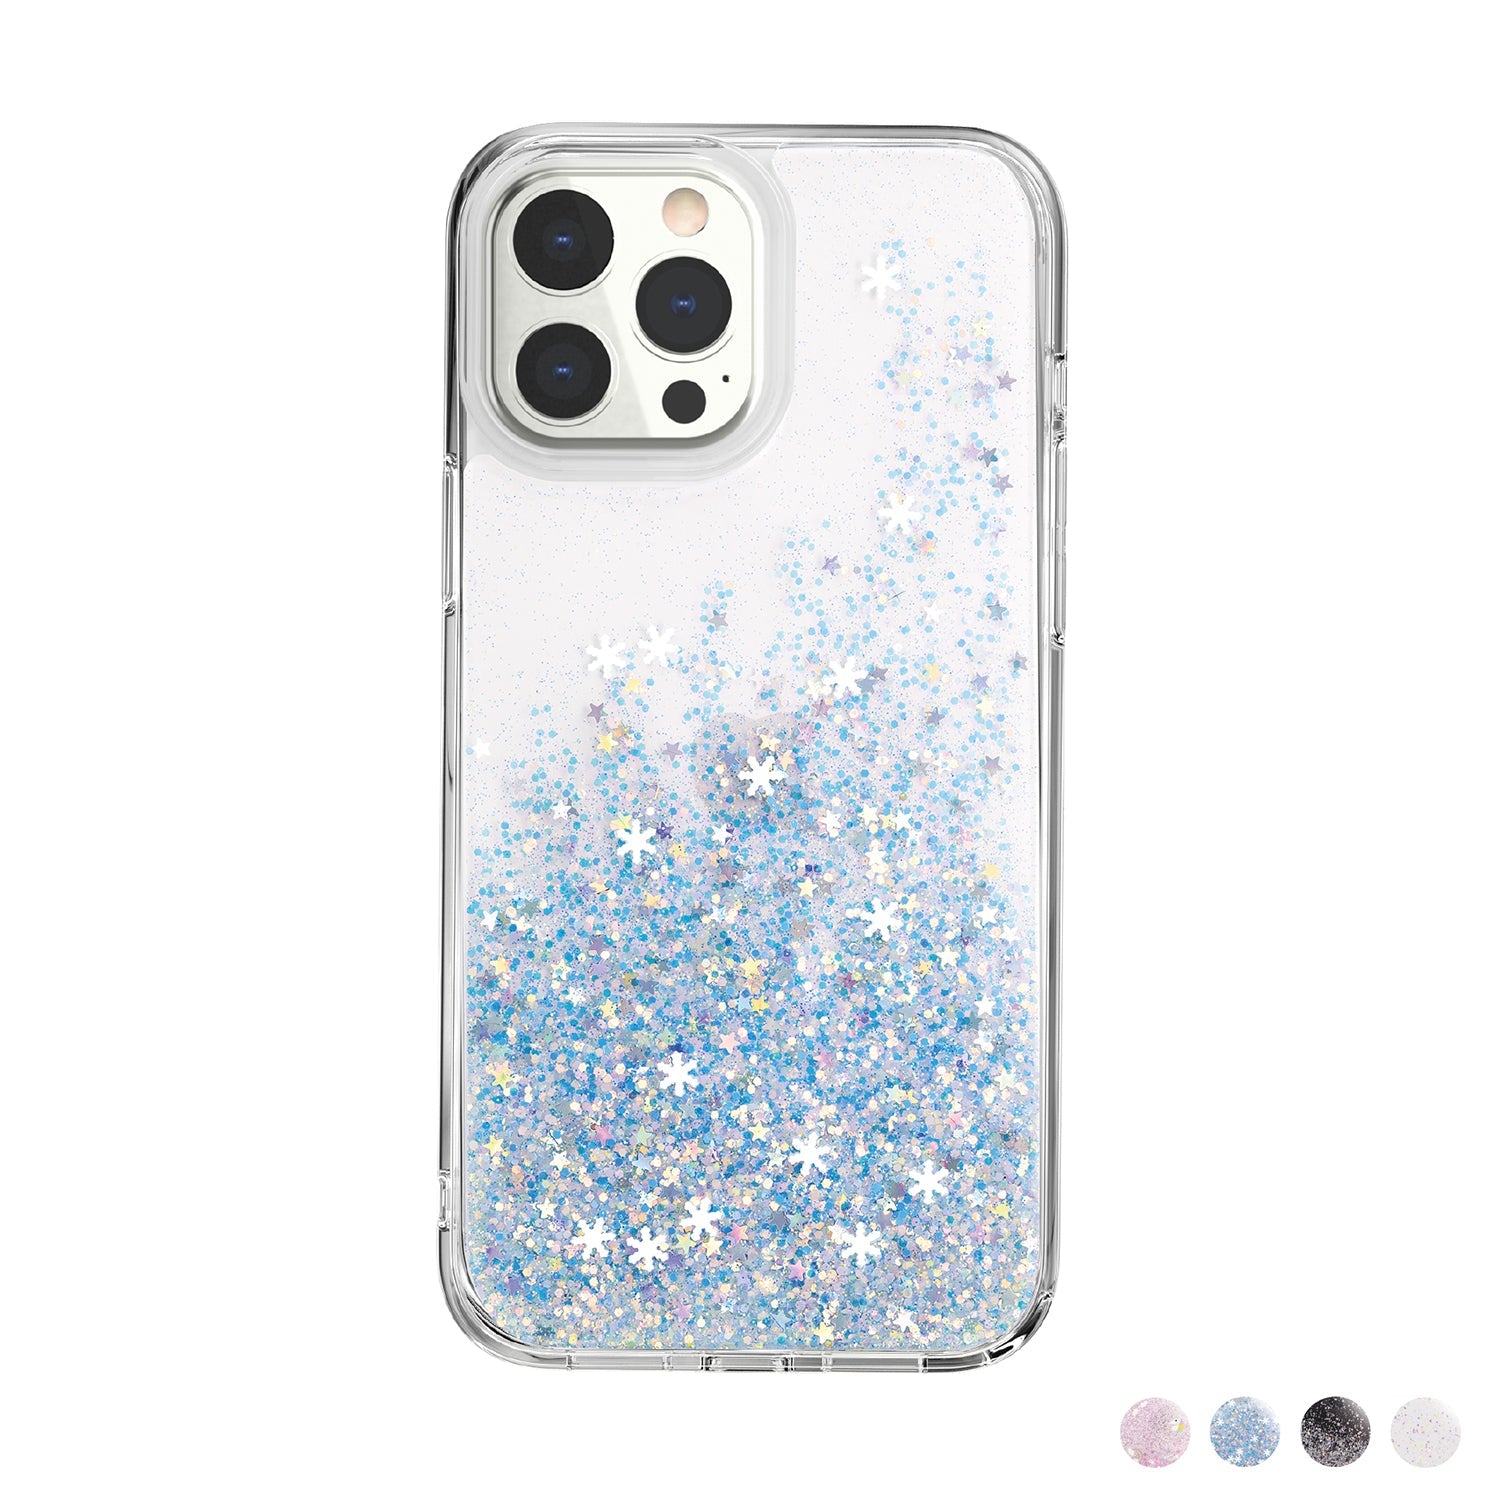 SwitchEasy Starfield Case for iPhone 13 Pro Max 6.7"(2021) Default SwitchEasy 